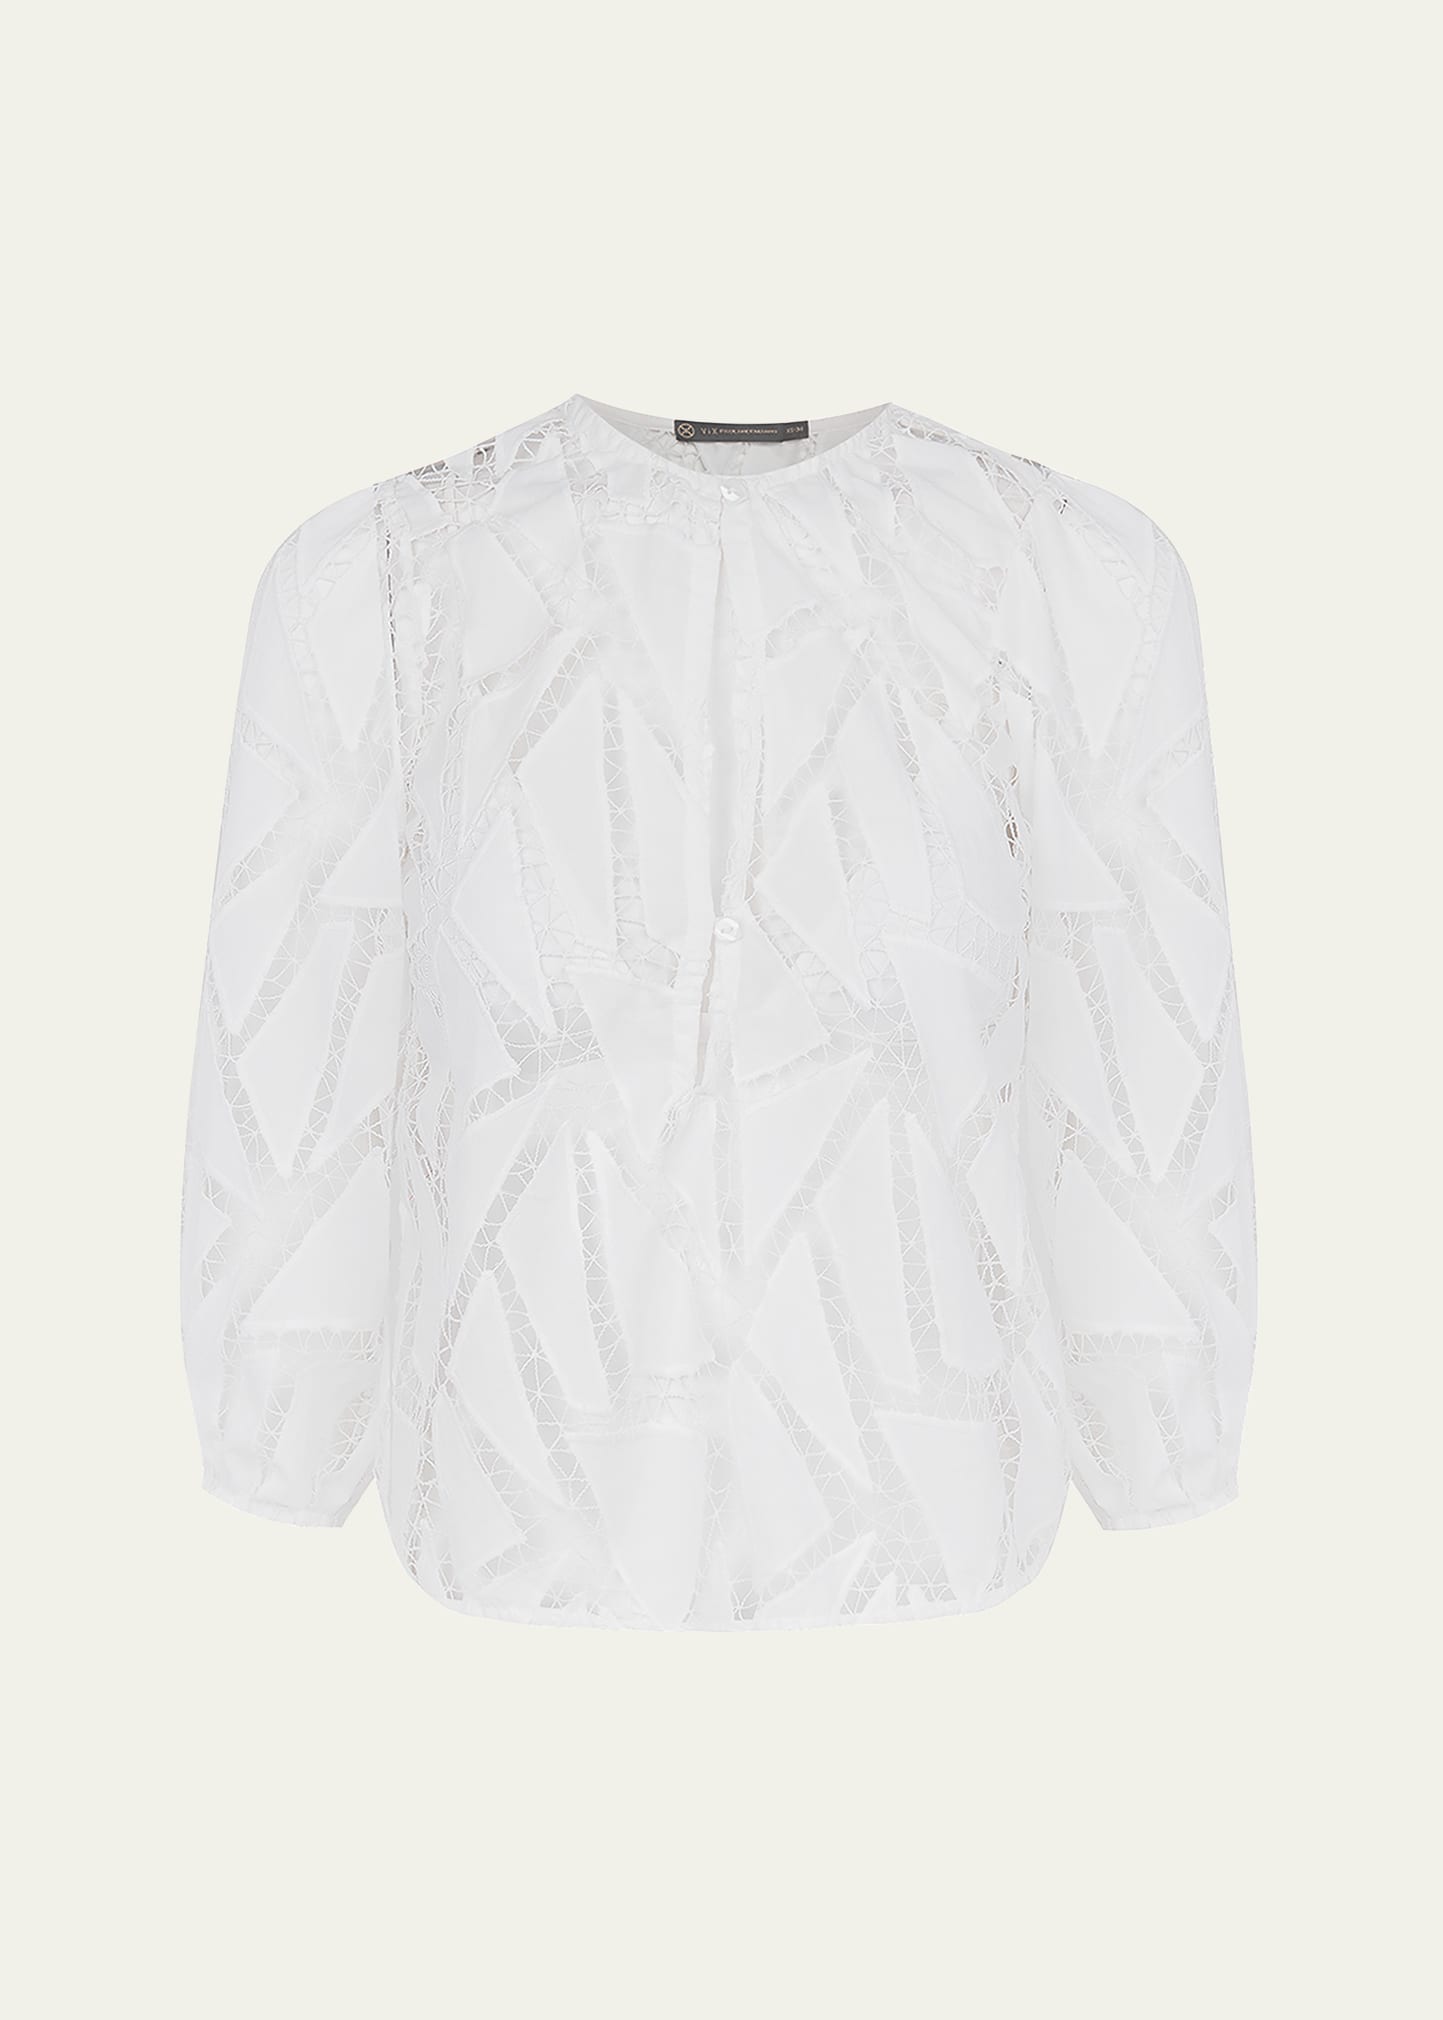 Vix Julieta Geometric Embroidered Blouse In Off White